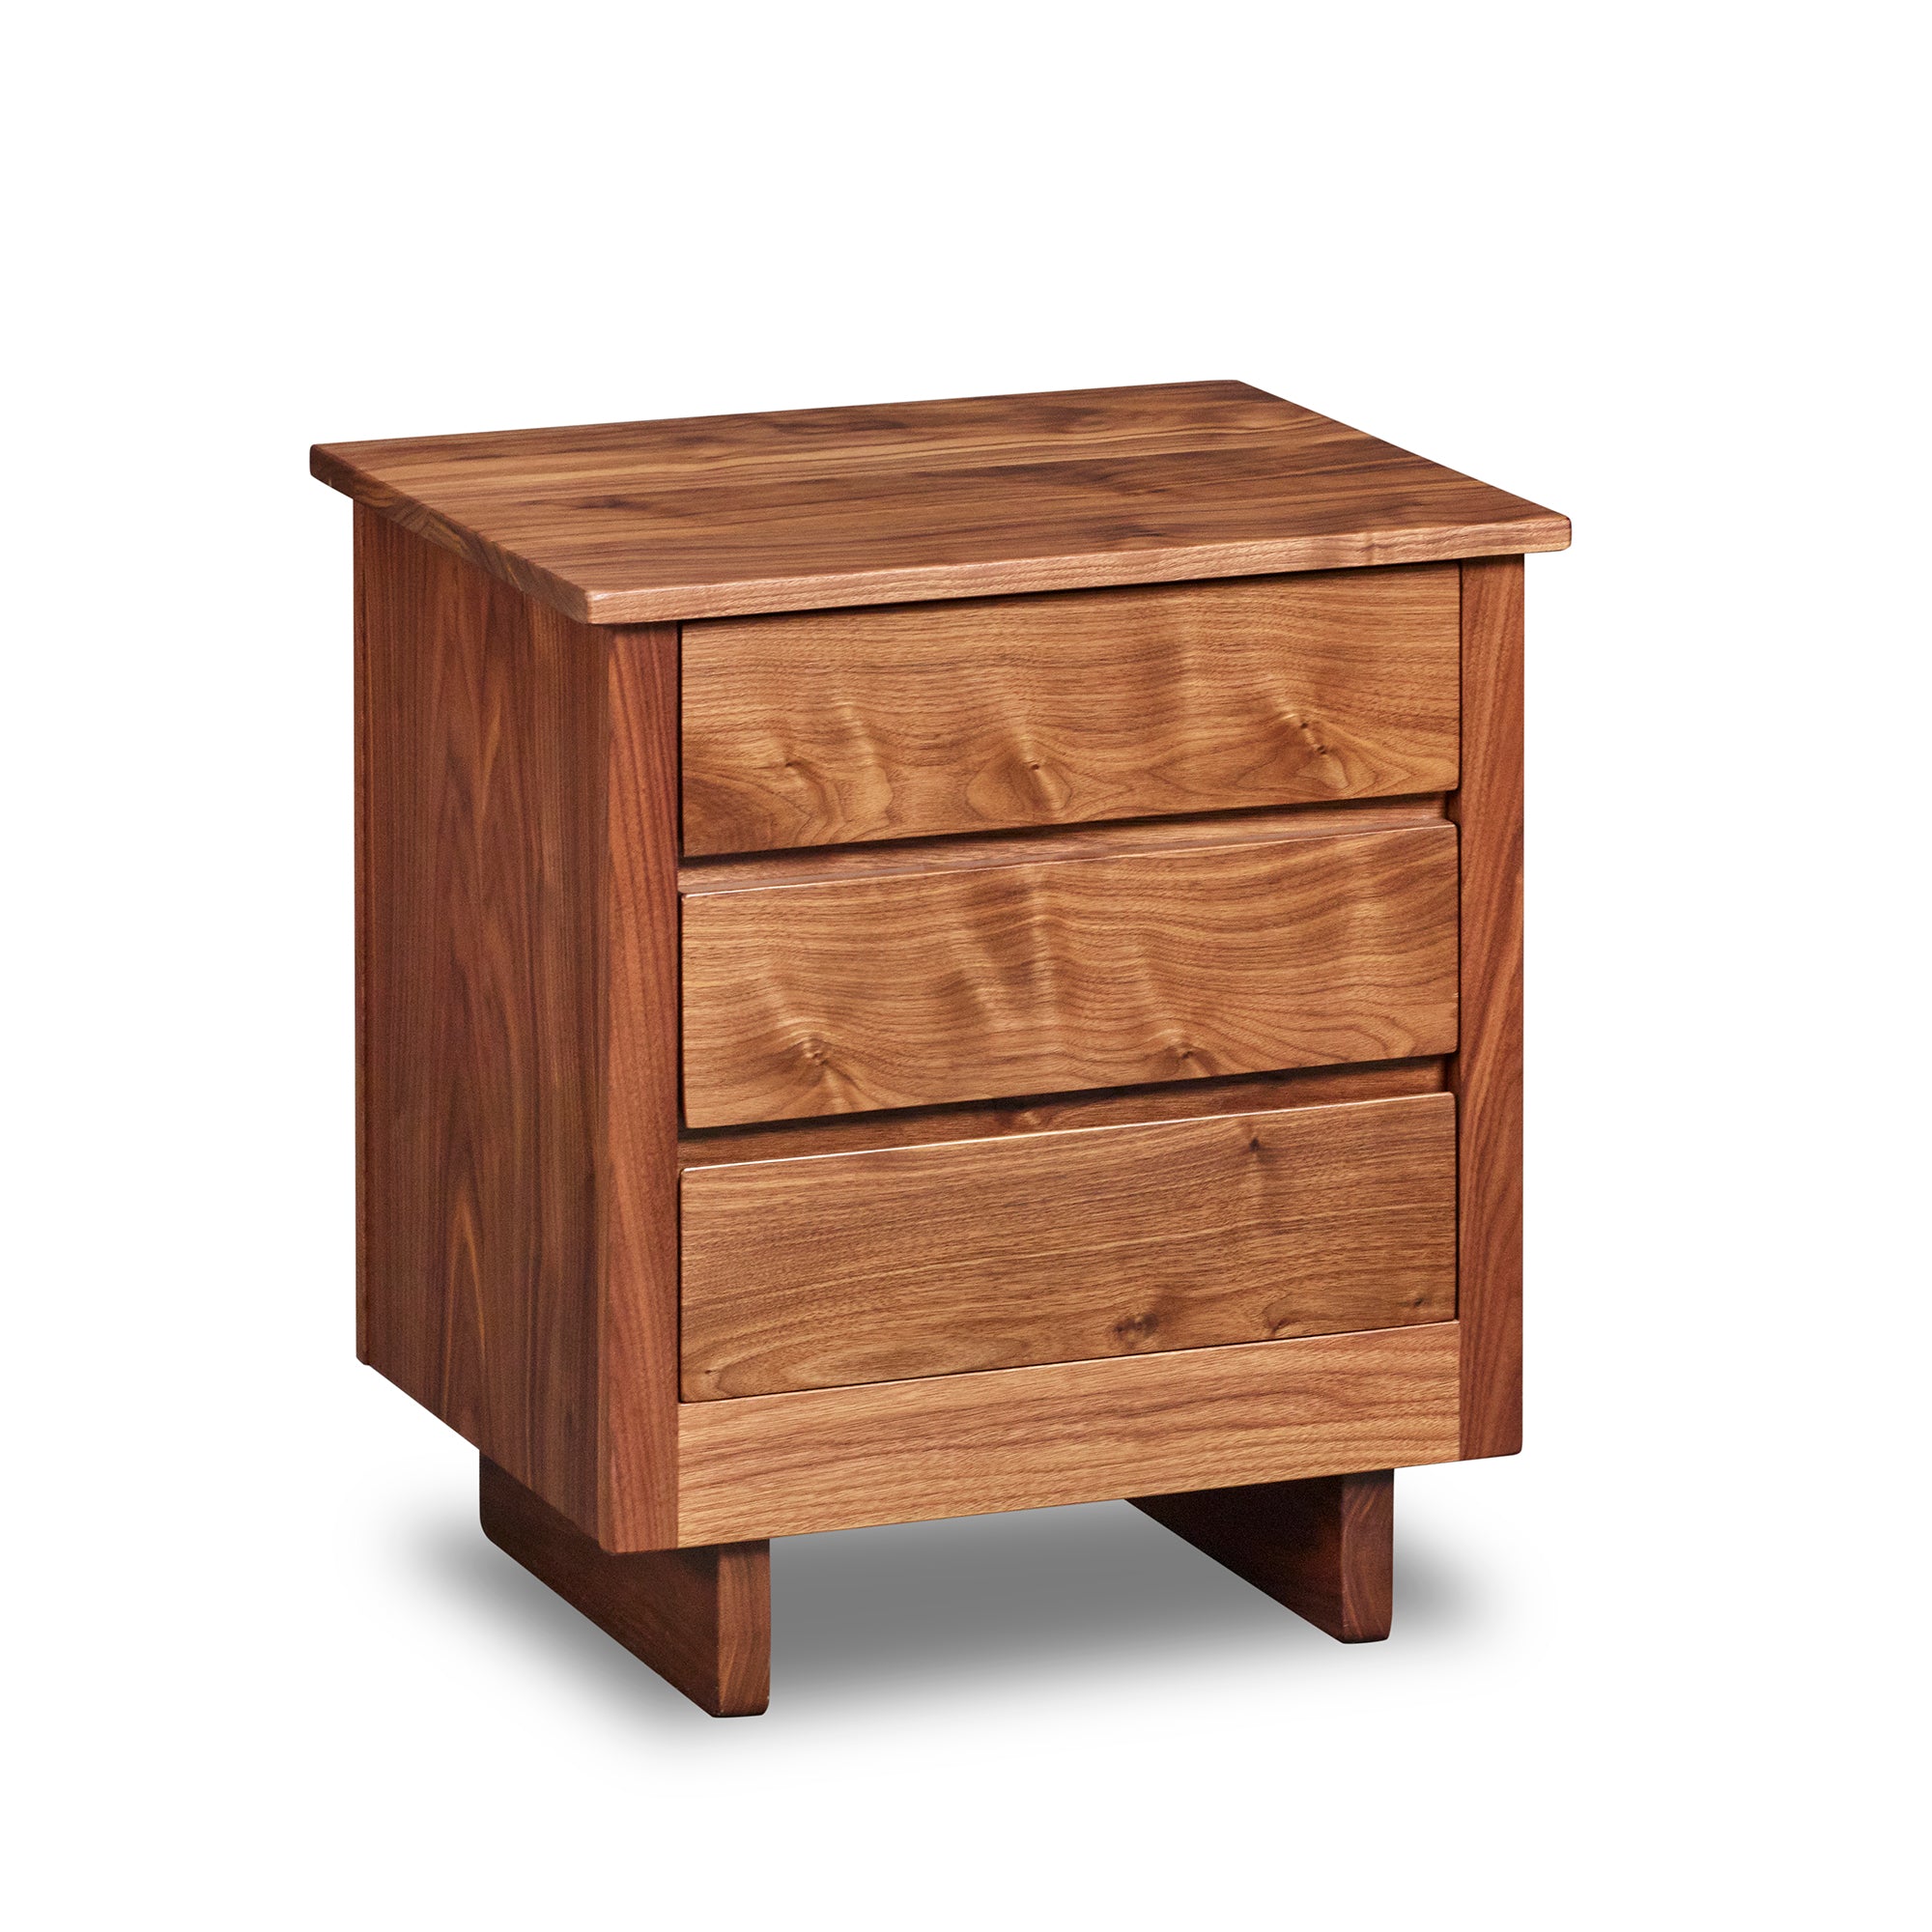 Chilton Furniture's Acadia collection three drawer walnut wood bedroom nightstand with under drawer pulls and panel base